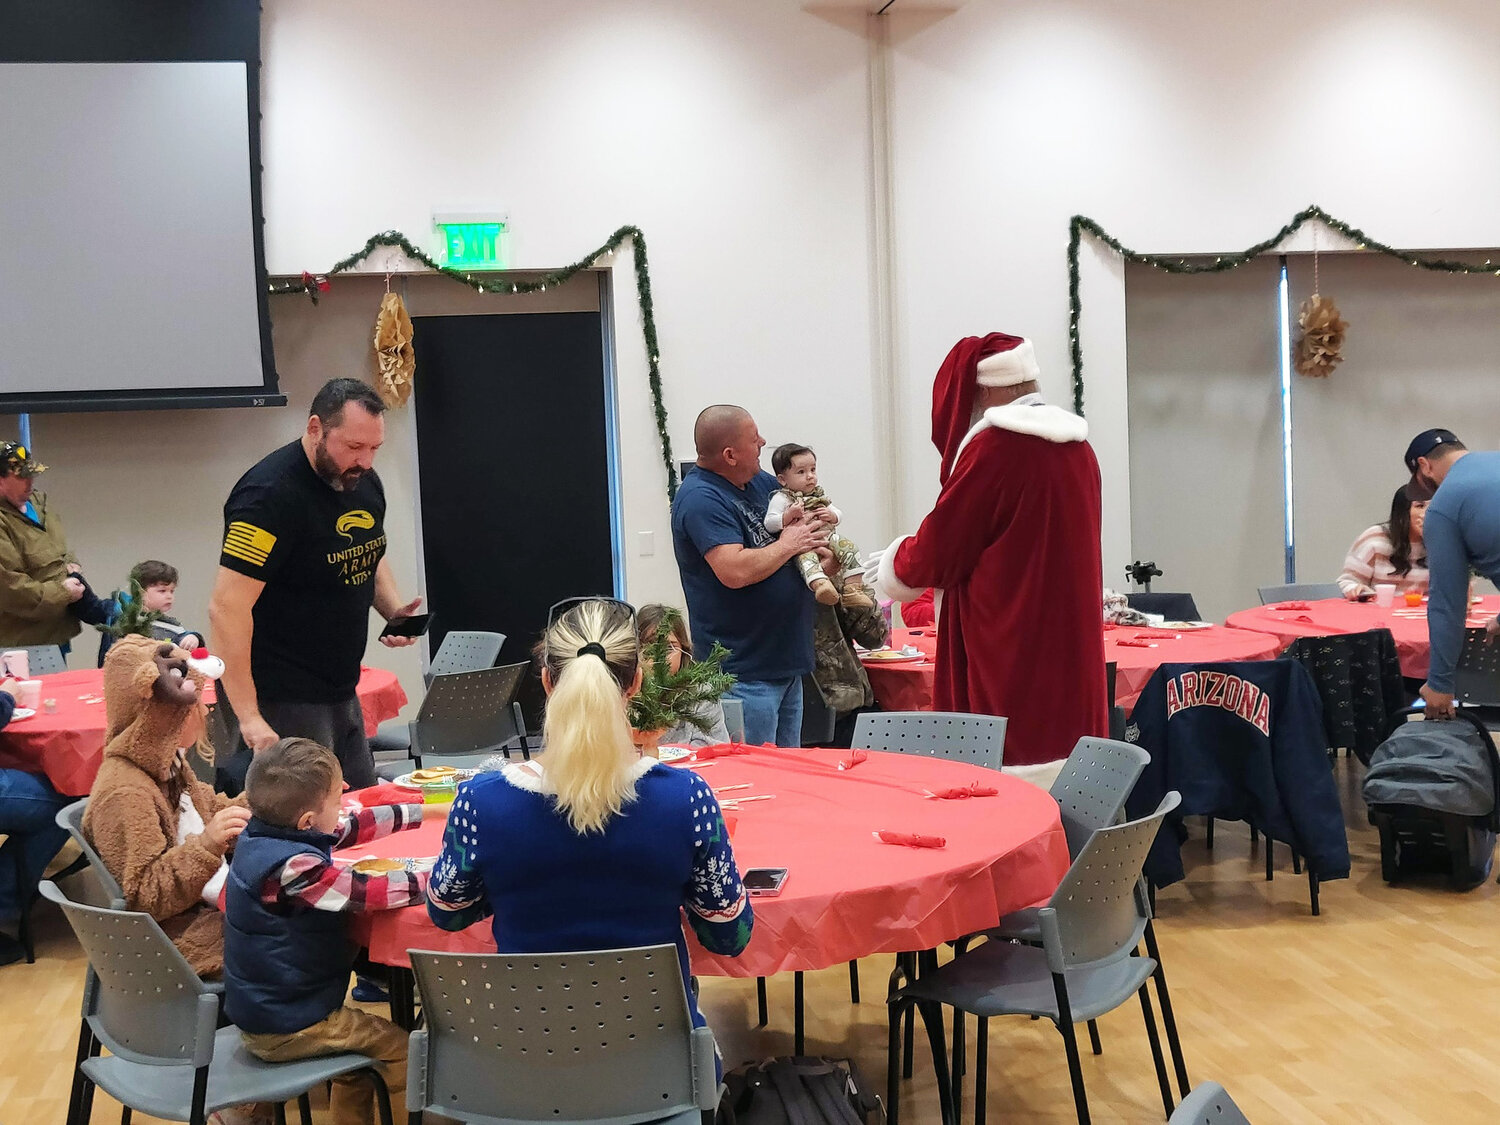 Florence’s fifth annual Breakfast with Santa takes place from 9 to 11 a.m., Saturday, Dec. 9 at the Viney Jones Library and Community Center, 778 N. Main St.